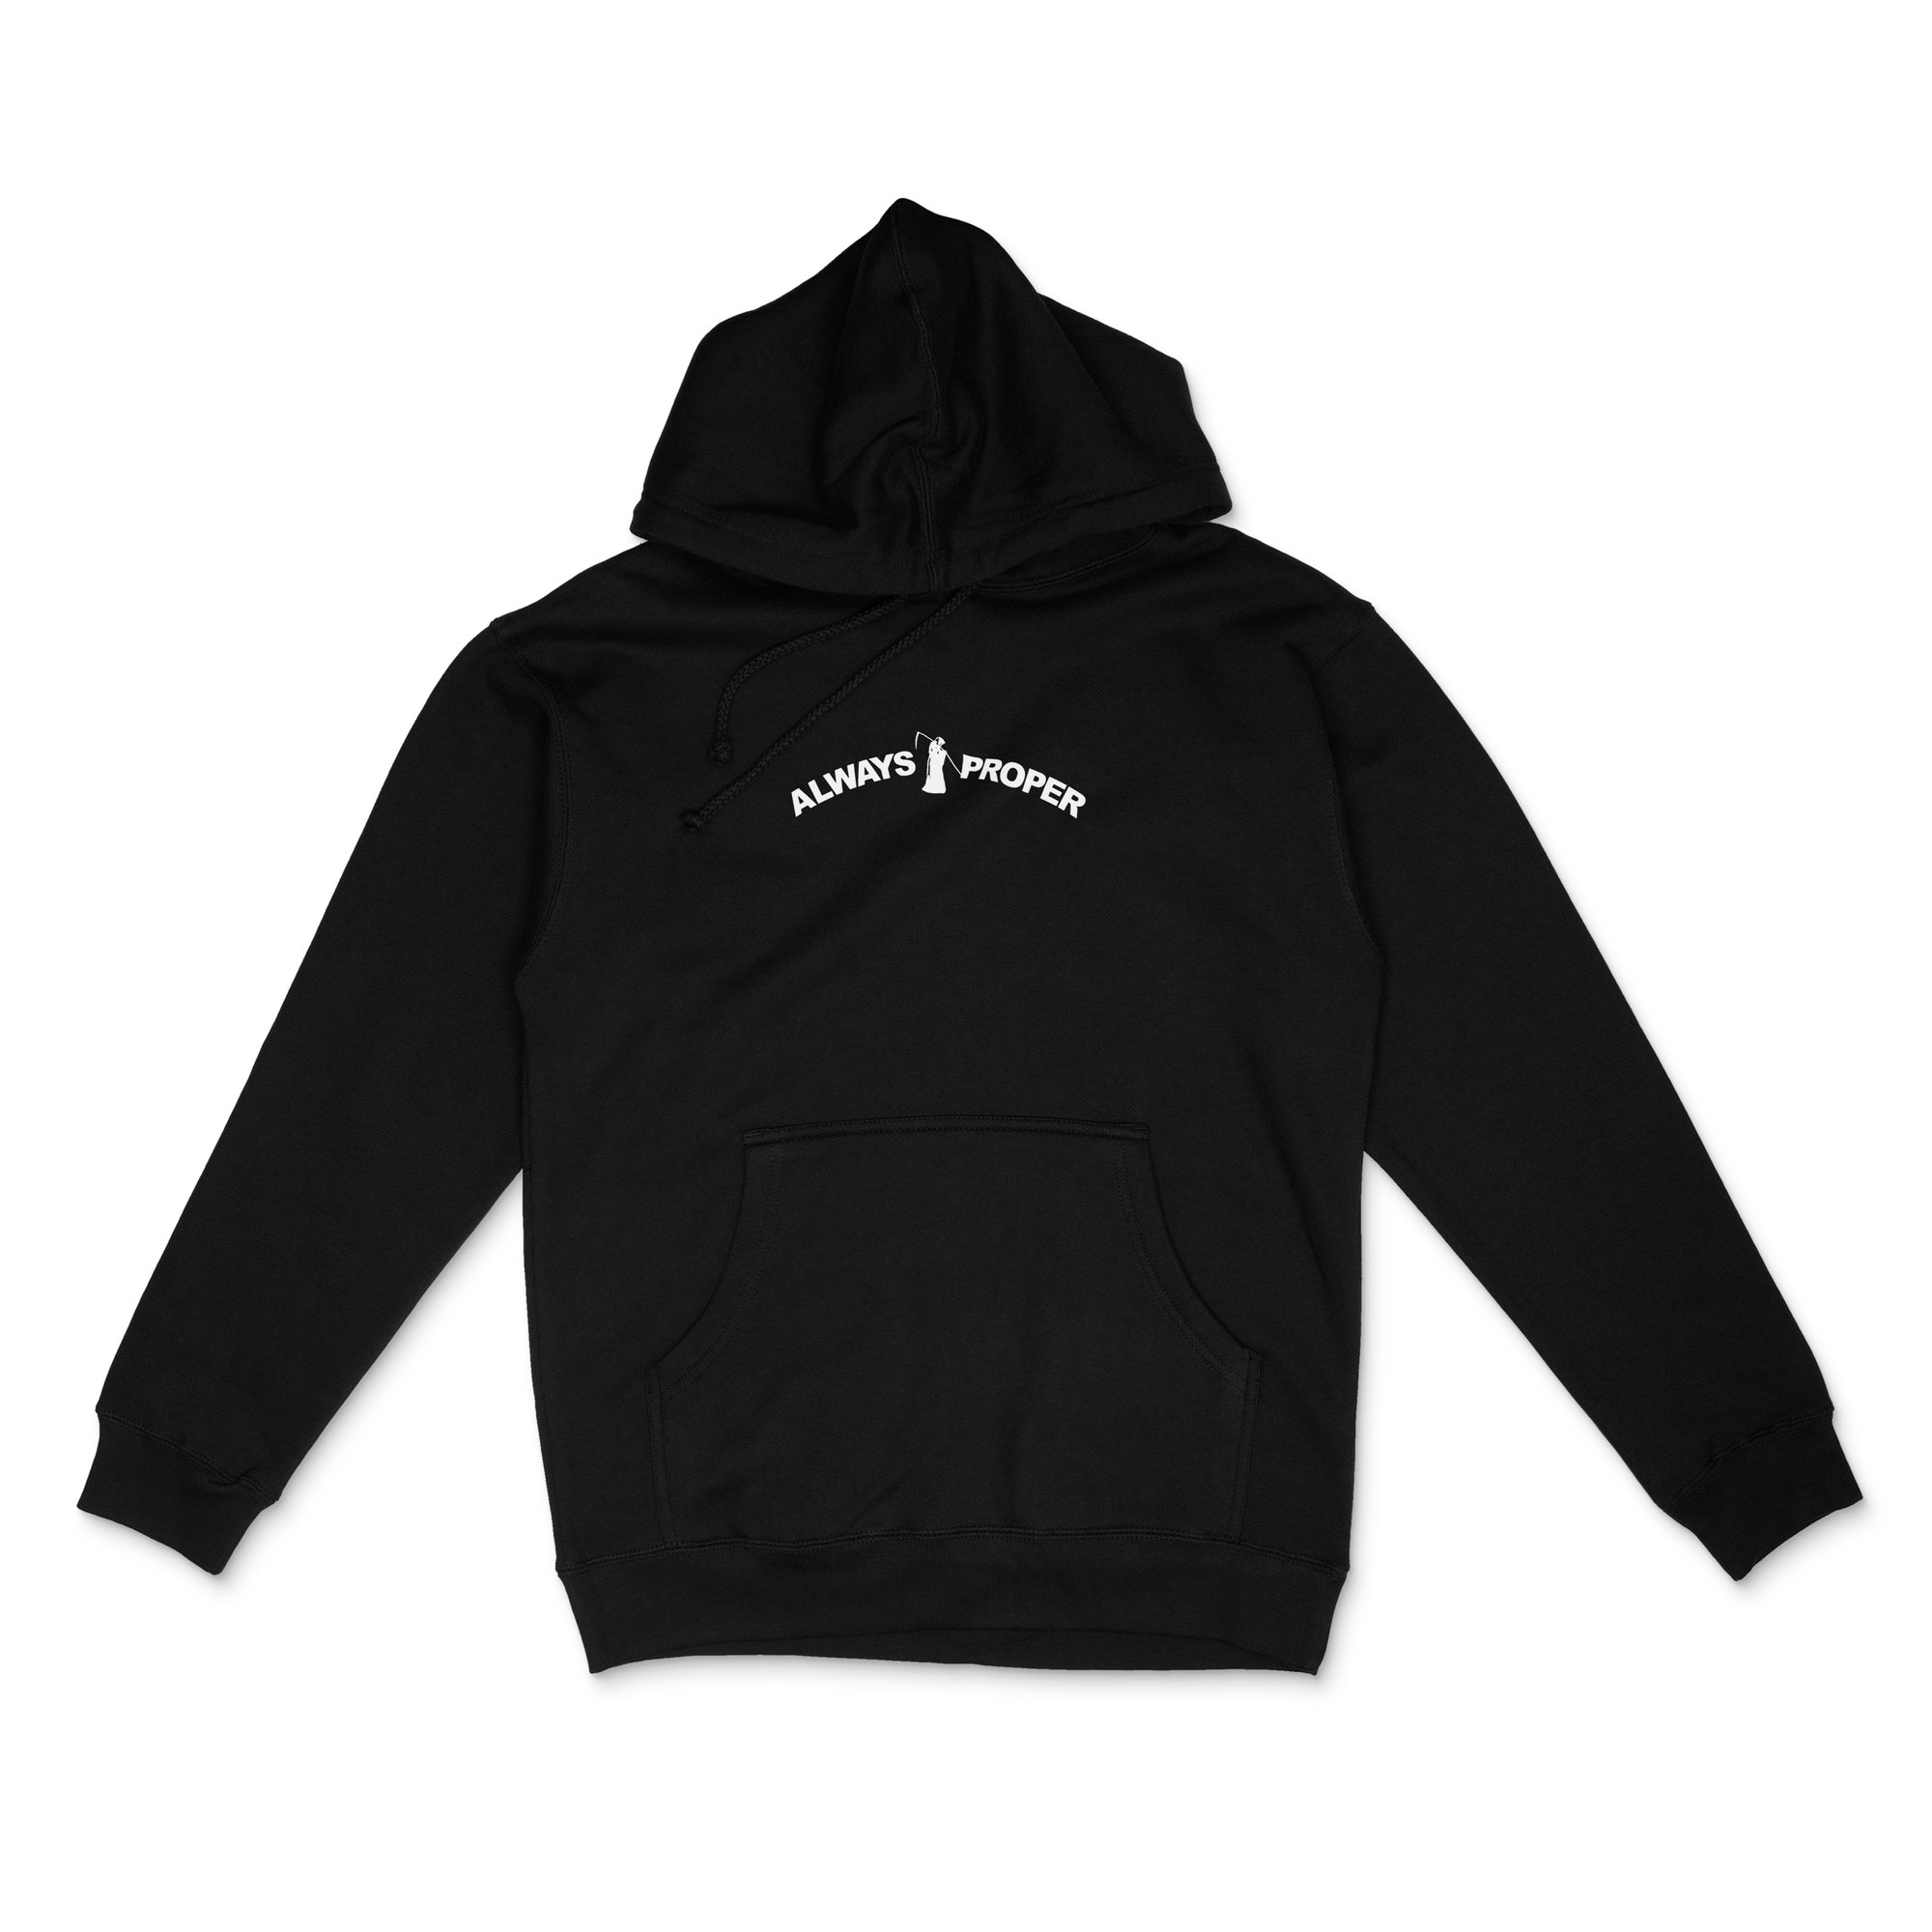 AP 4 LIFE EMBROIDERED BLACK HOODIE | ALWAYS PROPER RECORDS